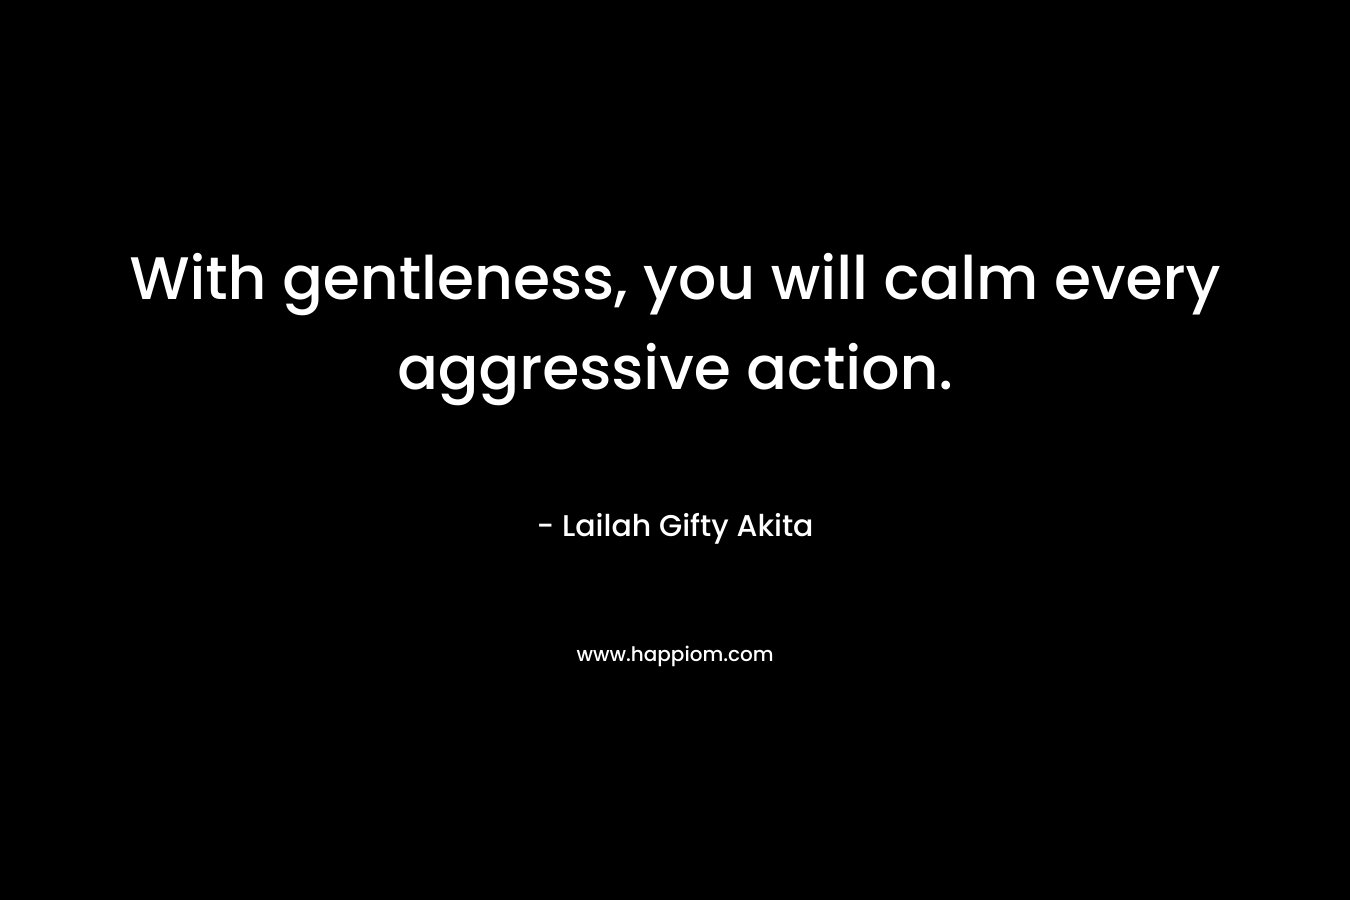 With gentleness, you will calm every aggressive action.